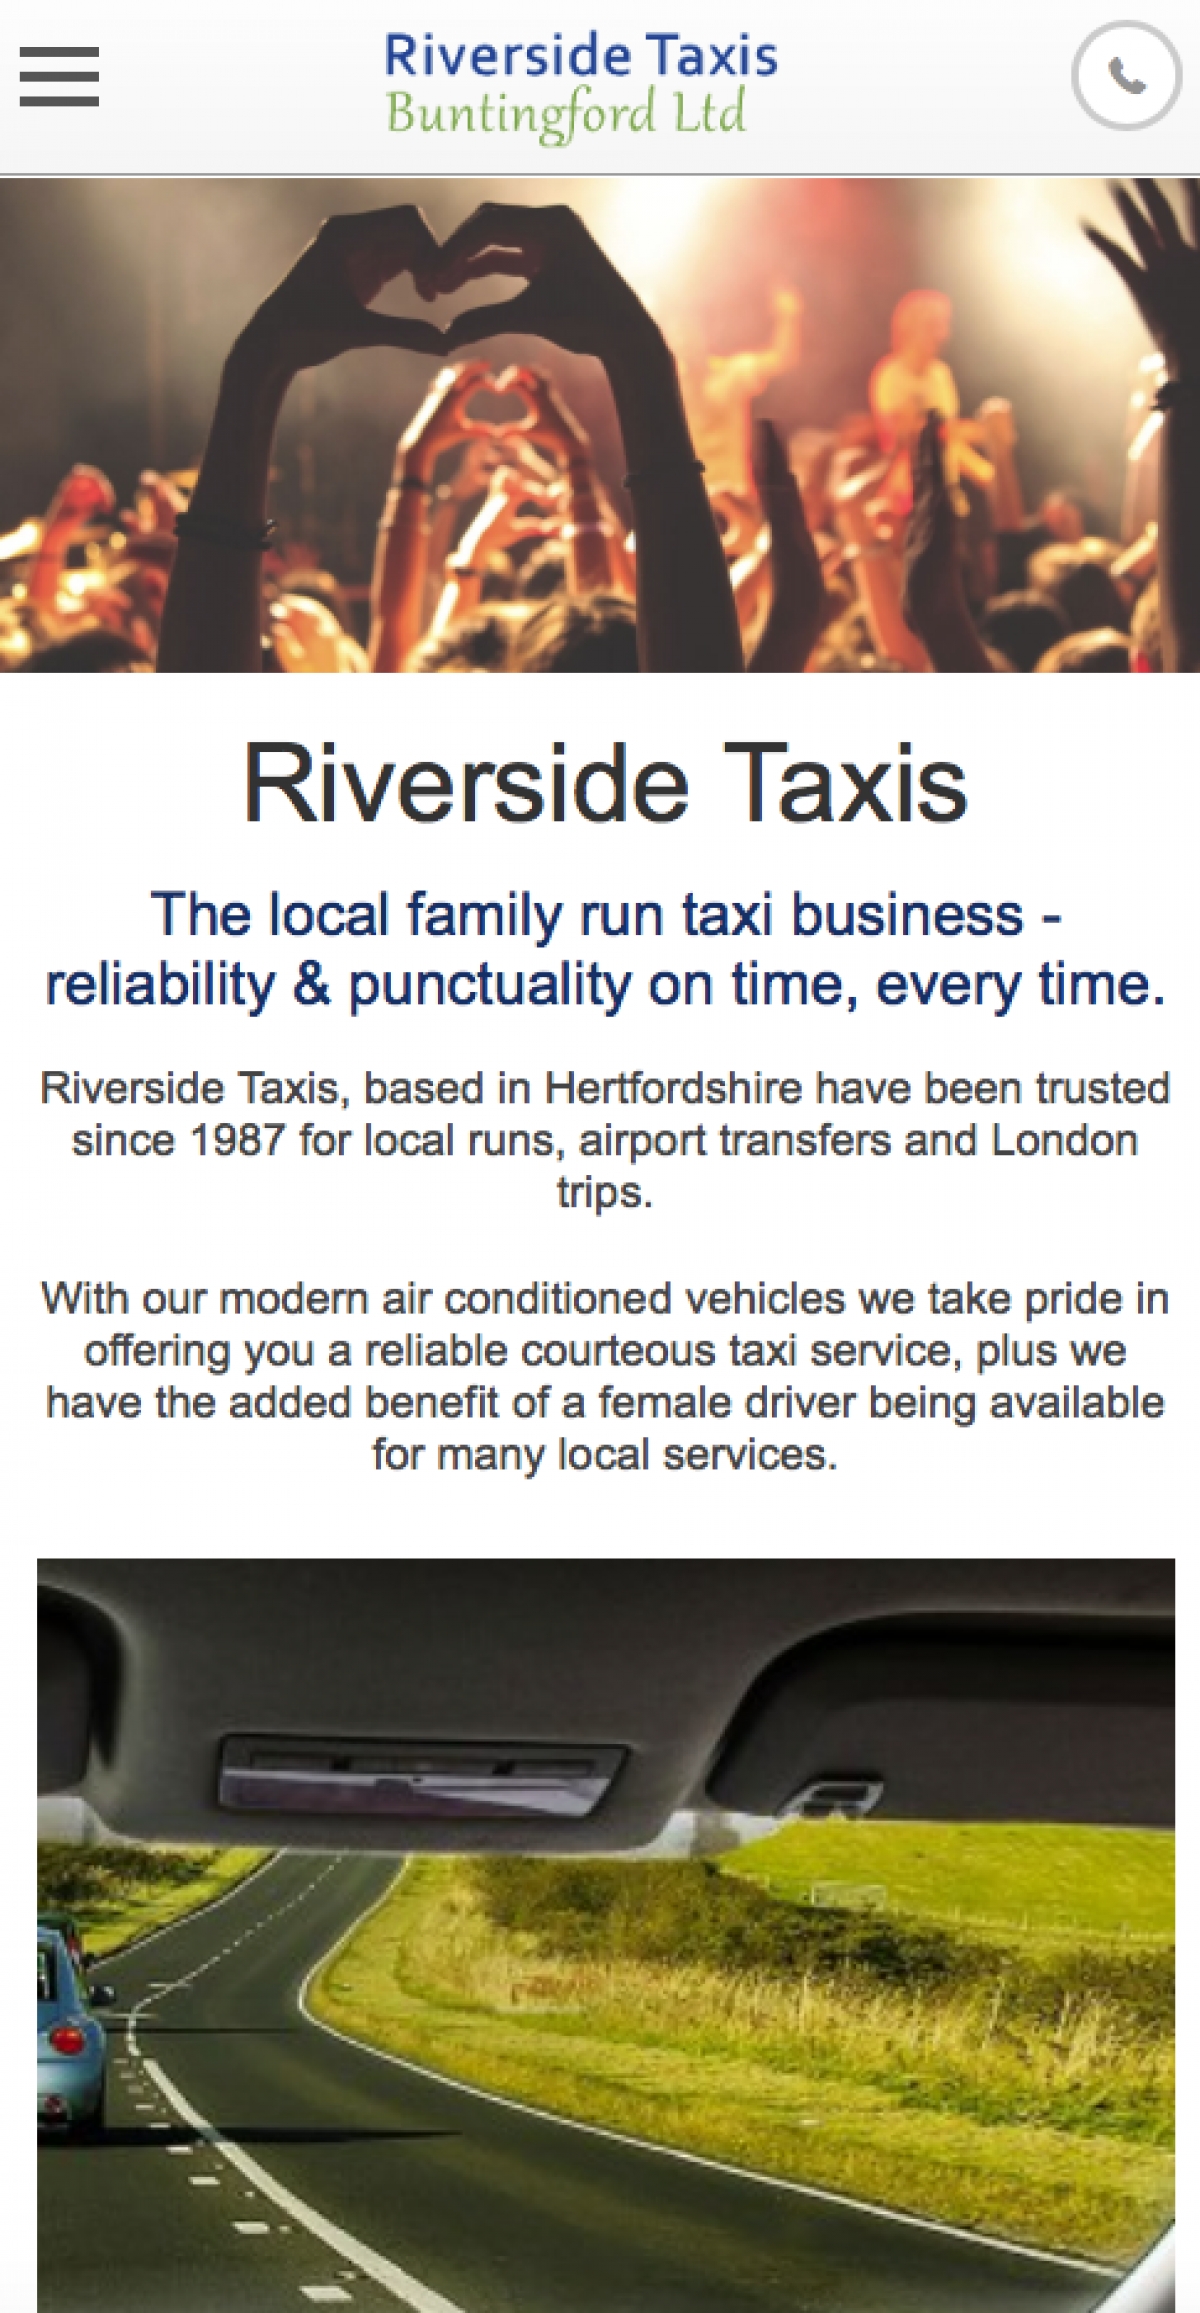 Riverside Taxis Family run taxi business in the heart of Hertfordshire